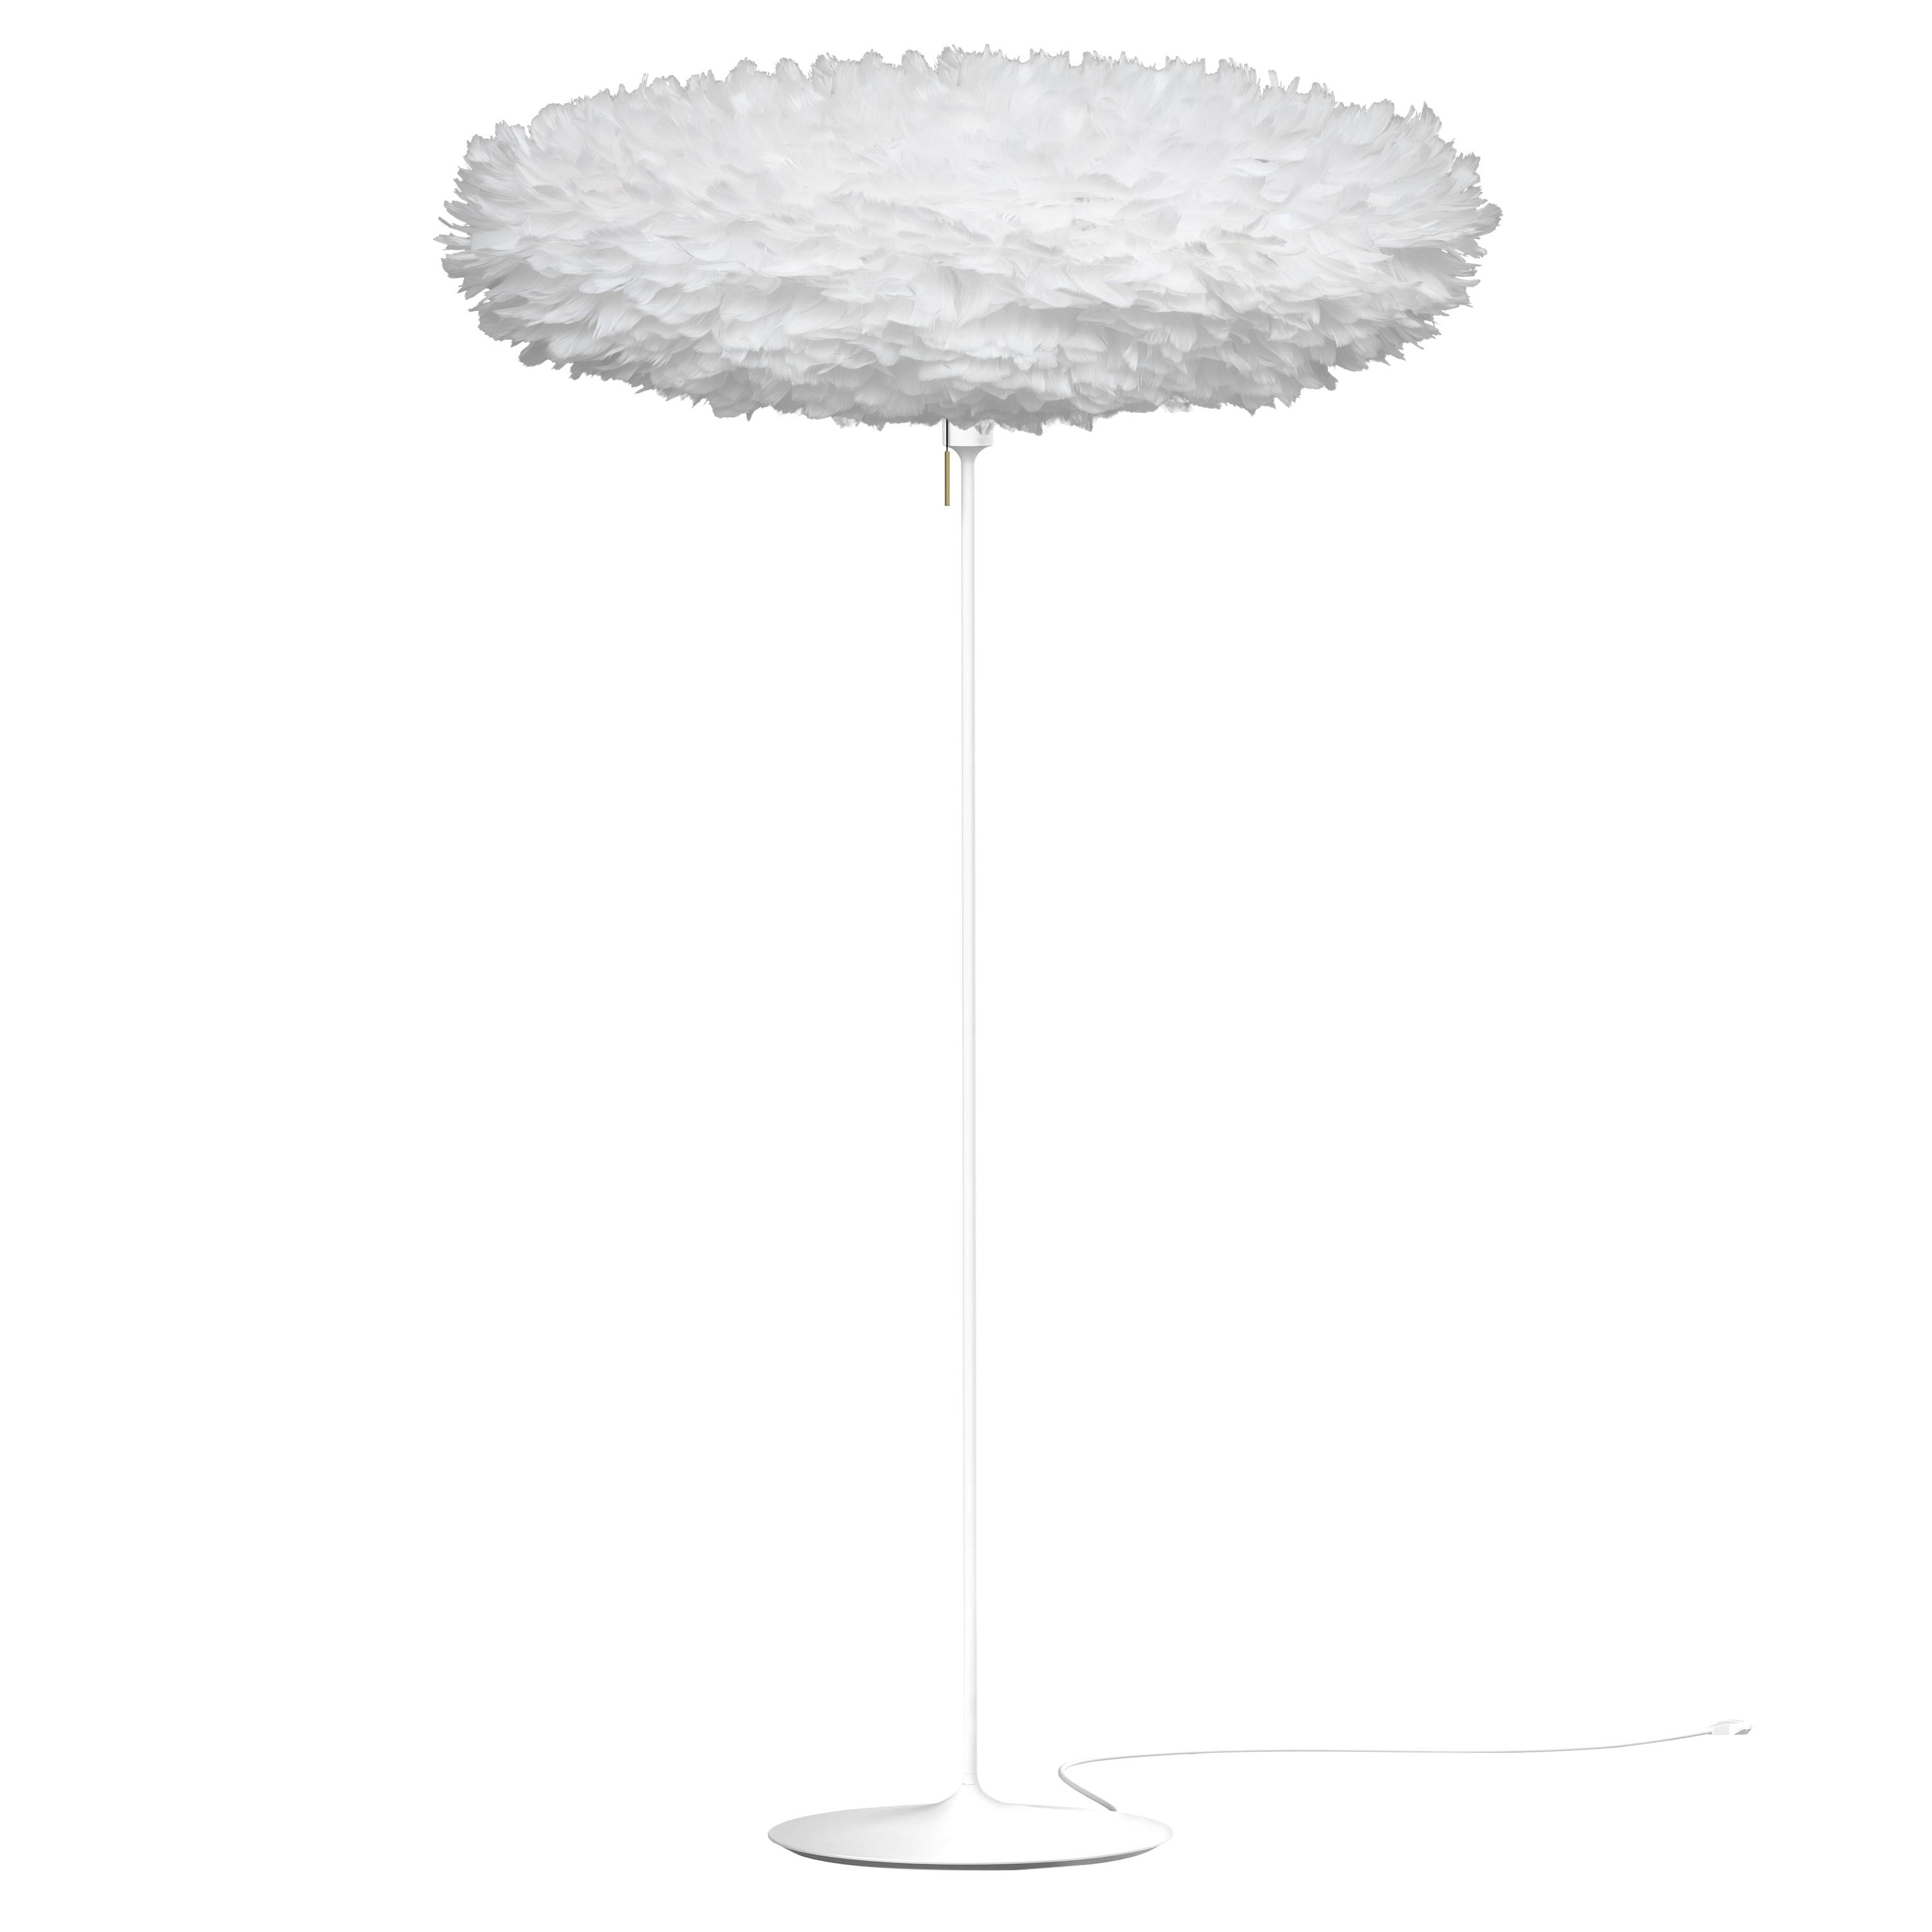 Eos Esther Champagne Floor Lamp: Large - 29.5